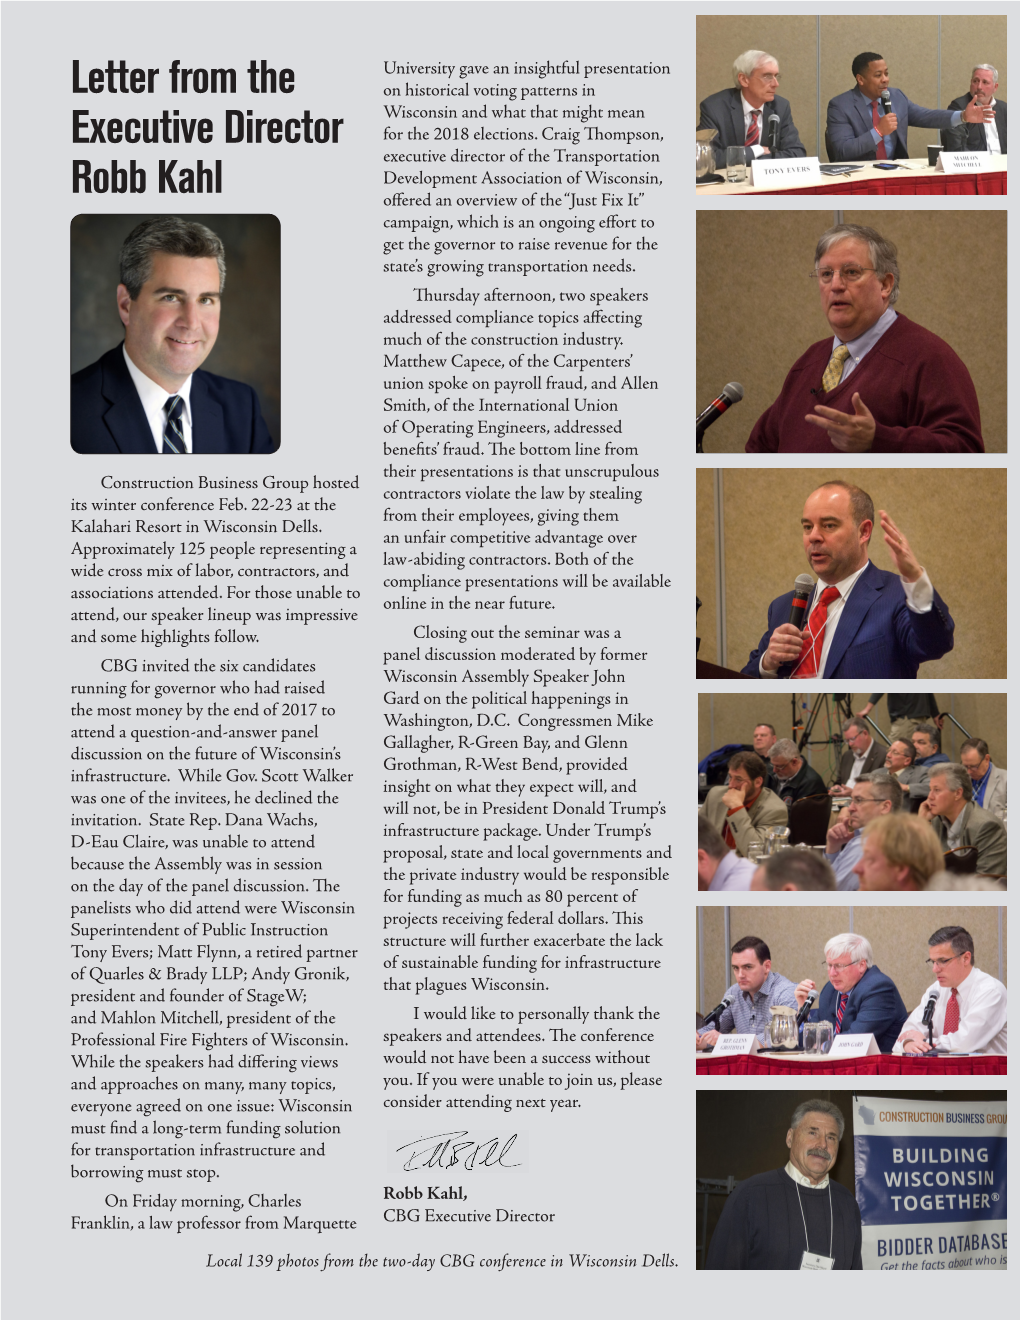 Letter from the Executive Director Robb Kahl